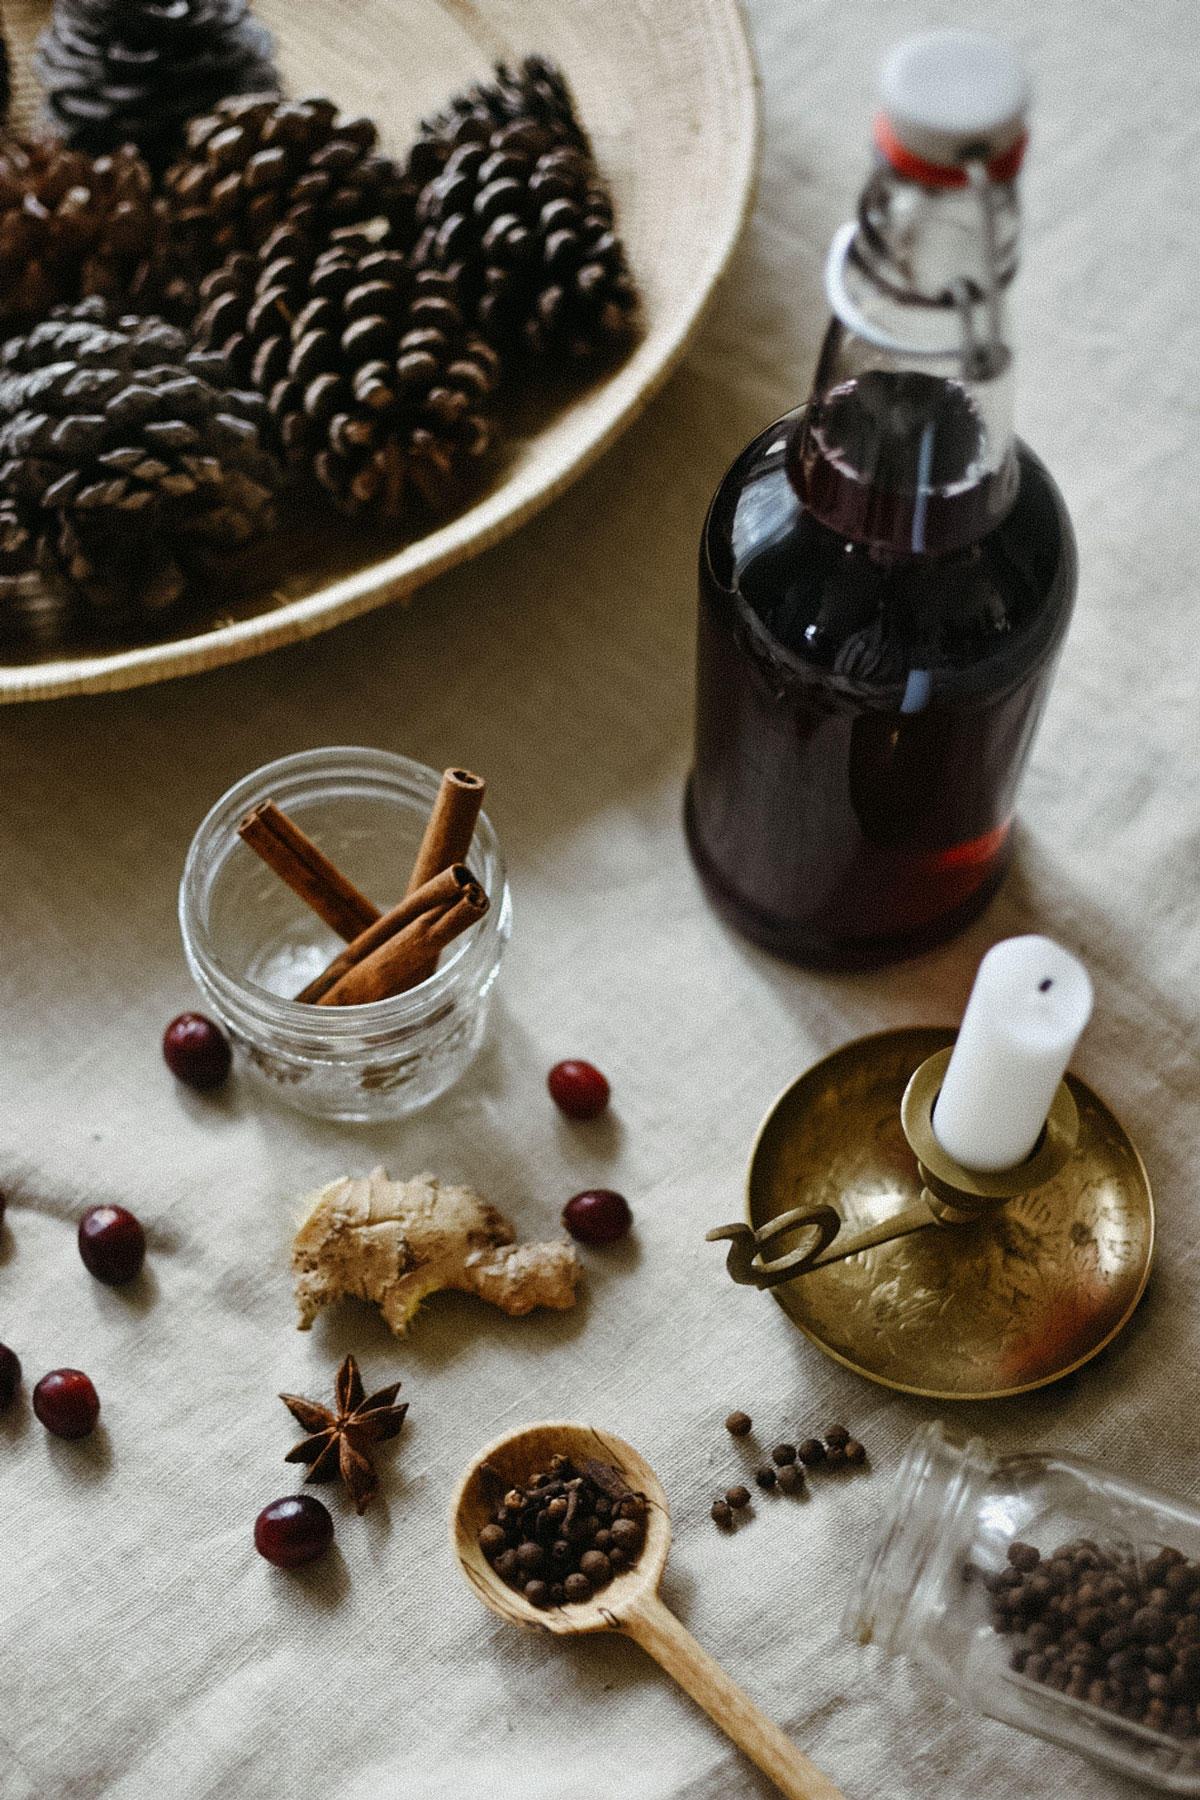 Cranberry hot toddy recipe ingredients on table